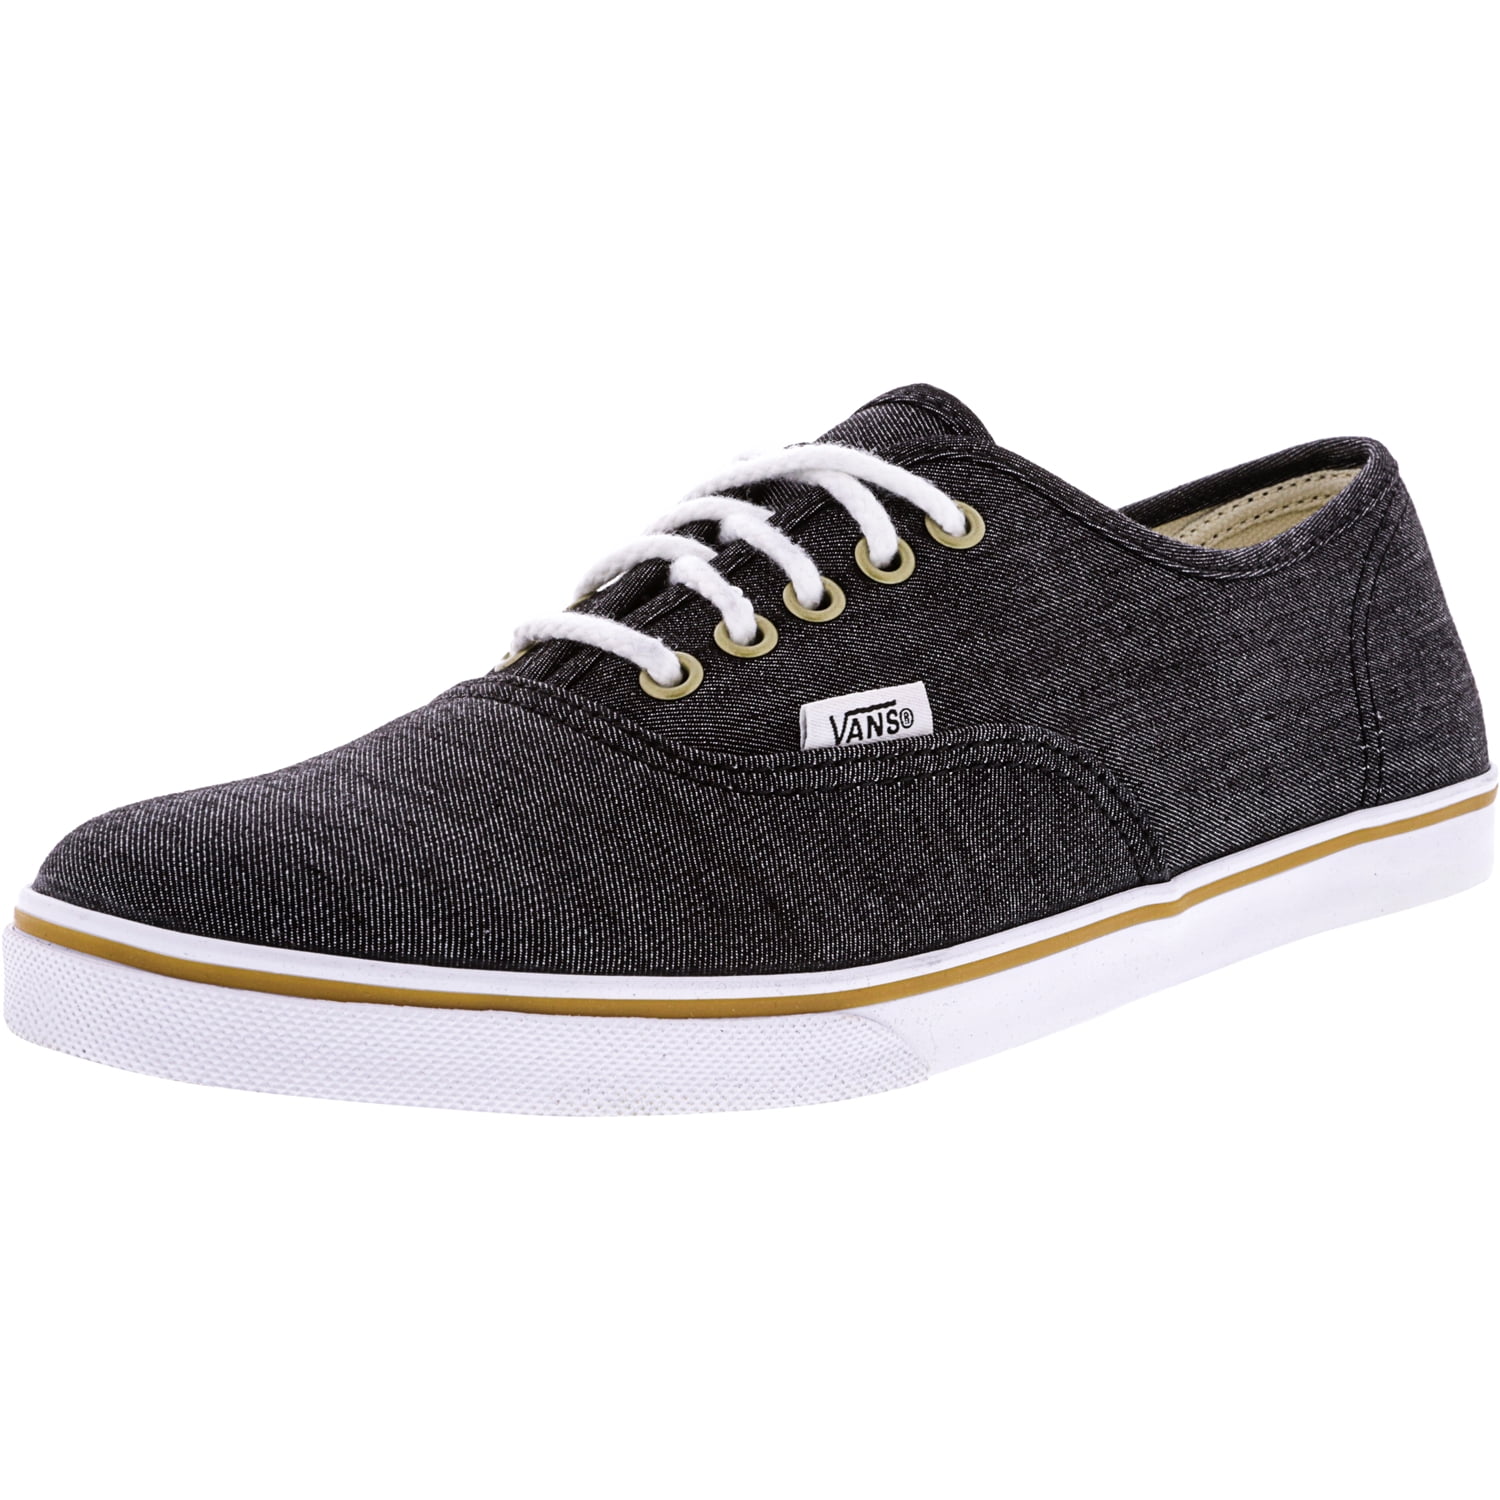 Vans Authentic Lo Pro Chambray Black / True White Ankle-High Canvas ...